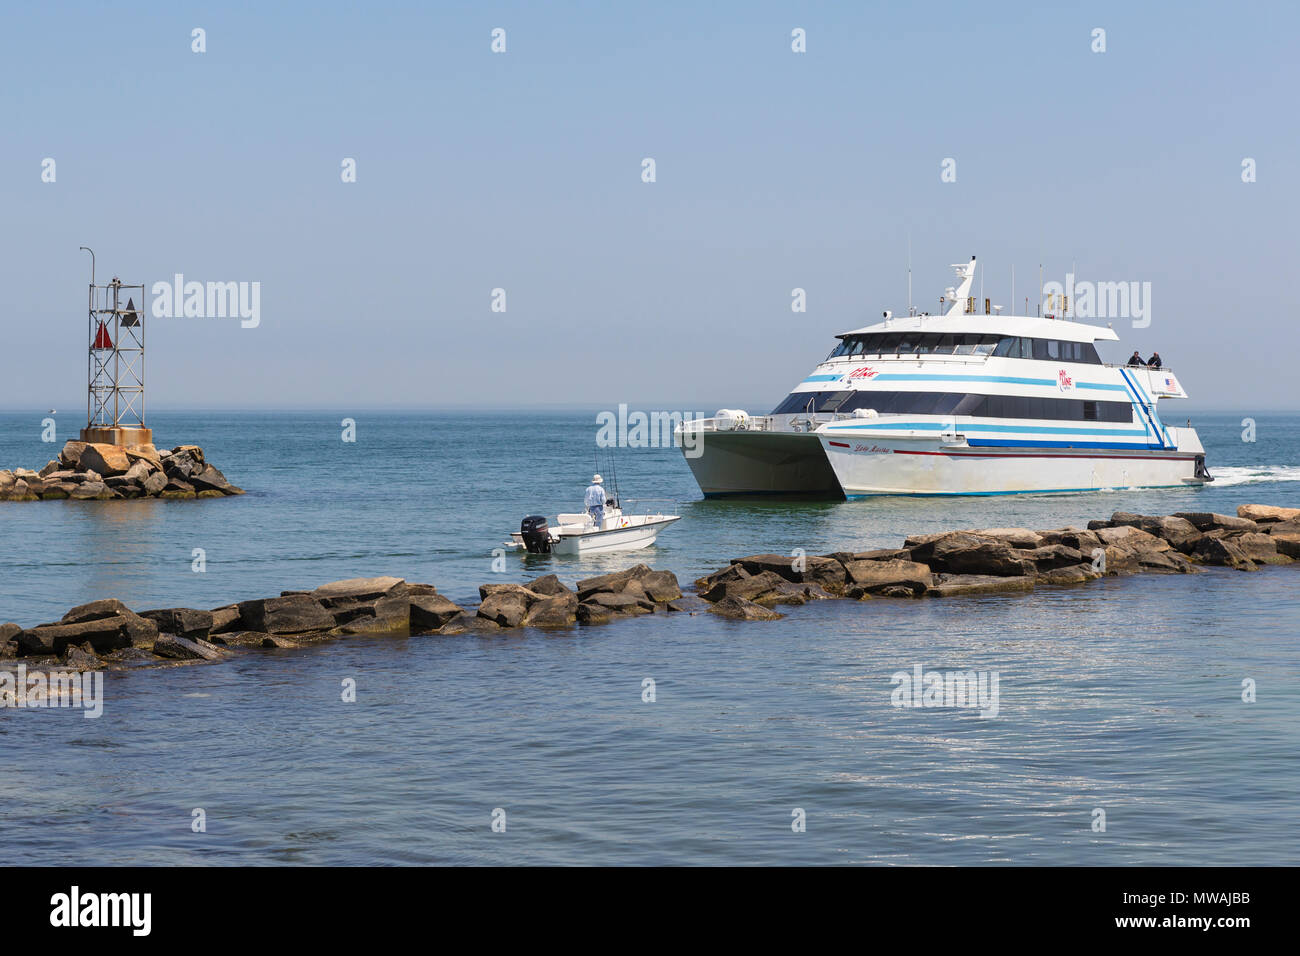 A Hy-Line Cruises high-speed catamaran ferry from Hyannis to Martha's Vineyard enters the harbor in Oak Bluffs, Massachusetts. Stock Photo